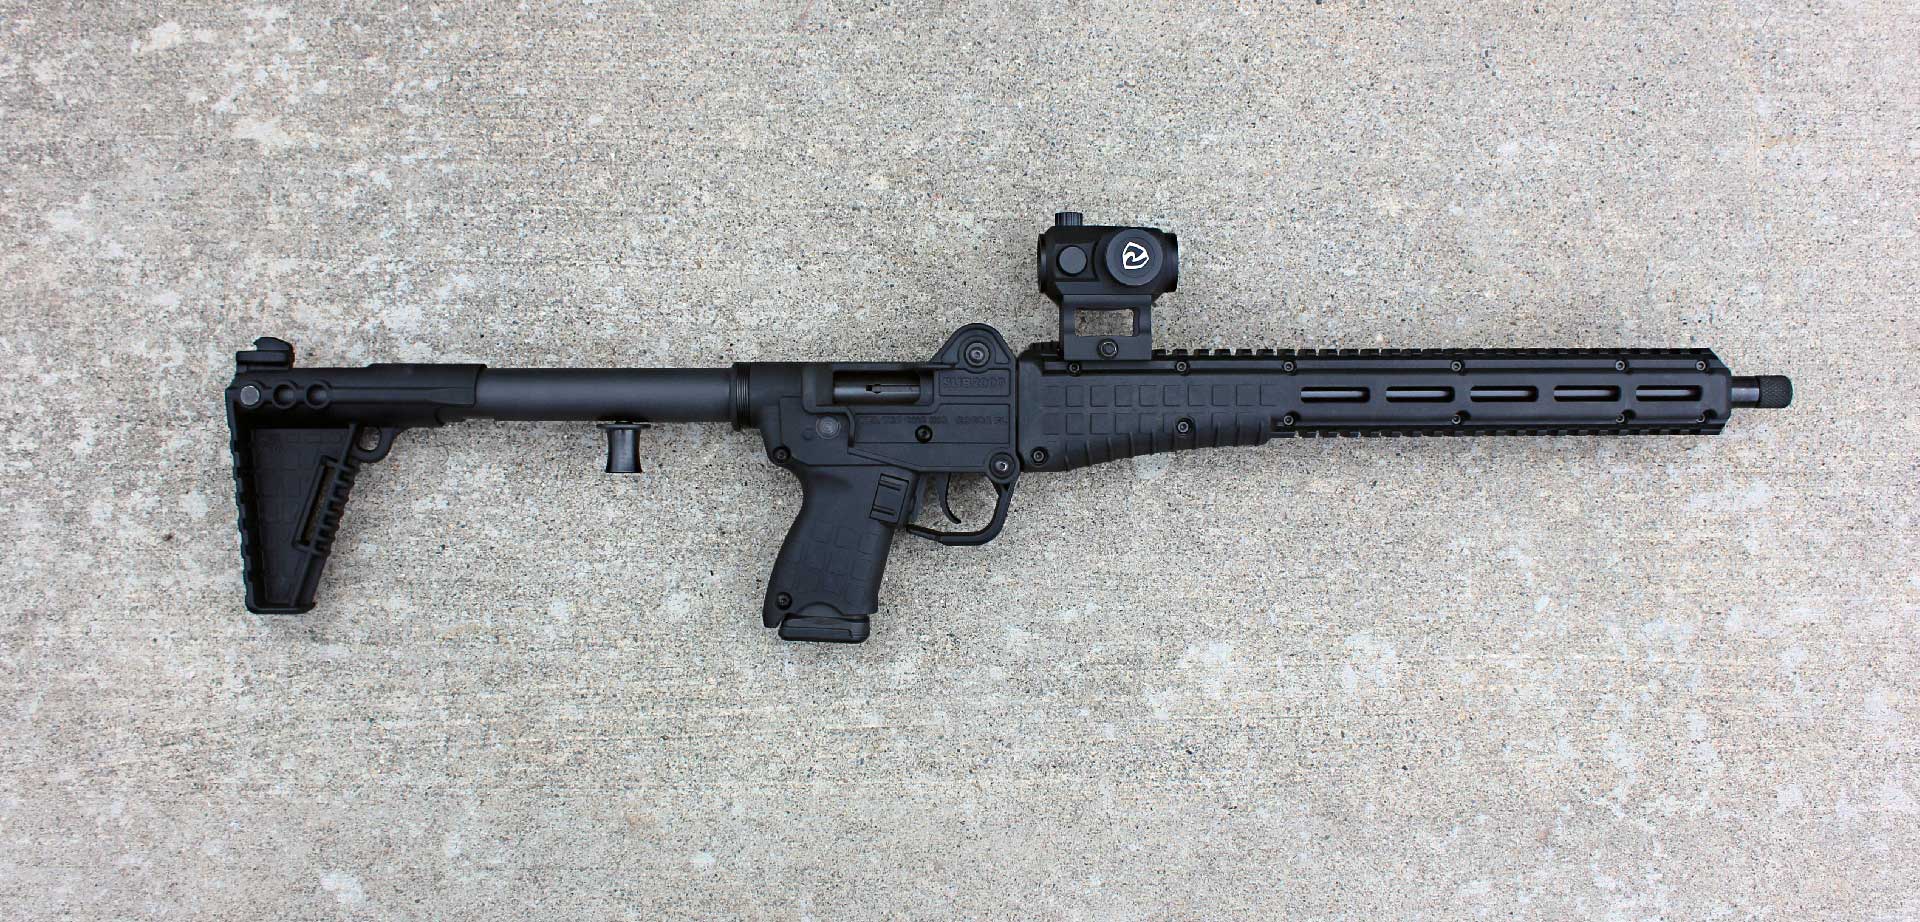 Right side of the KelTec SUB2000 GEN3 carbine.